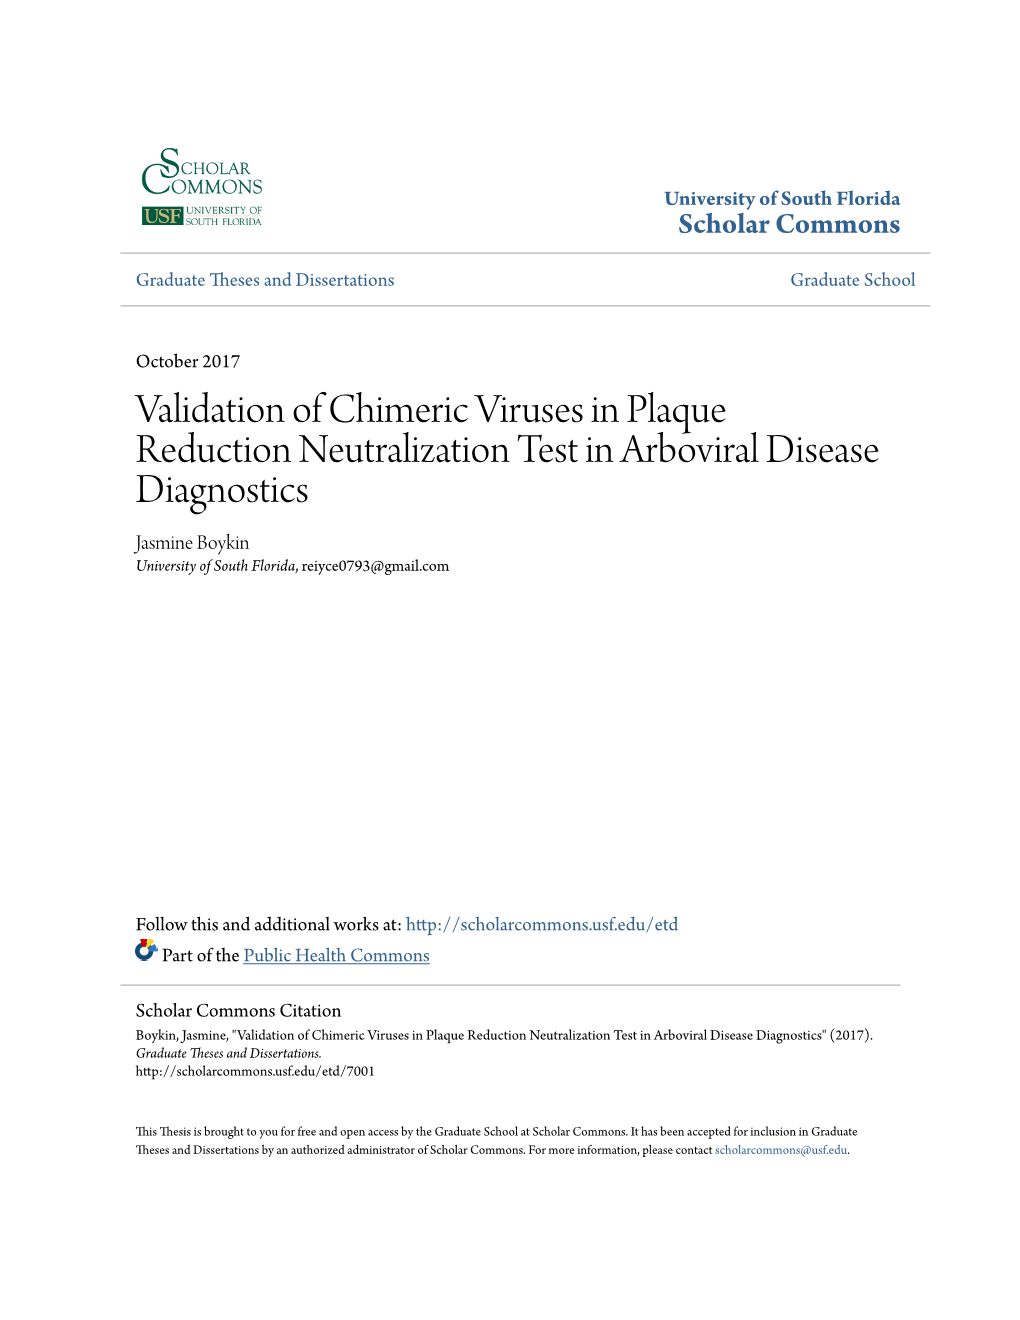 Validation of Chimeric Viruses in Plaque Reduction Neutralization Test in Arboviral Disease Diagnostics